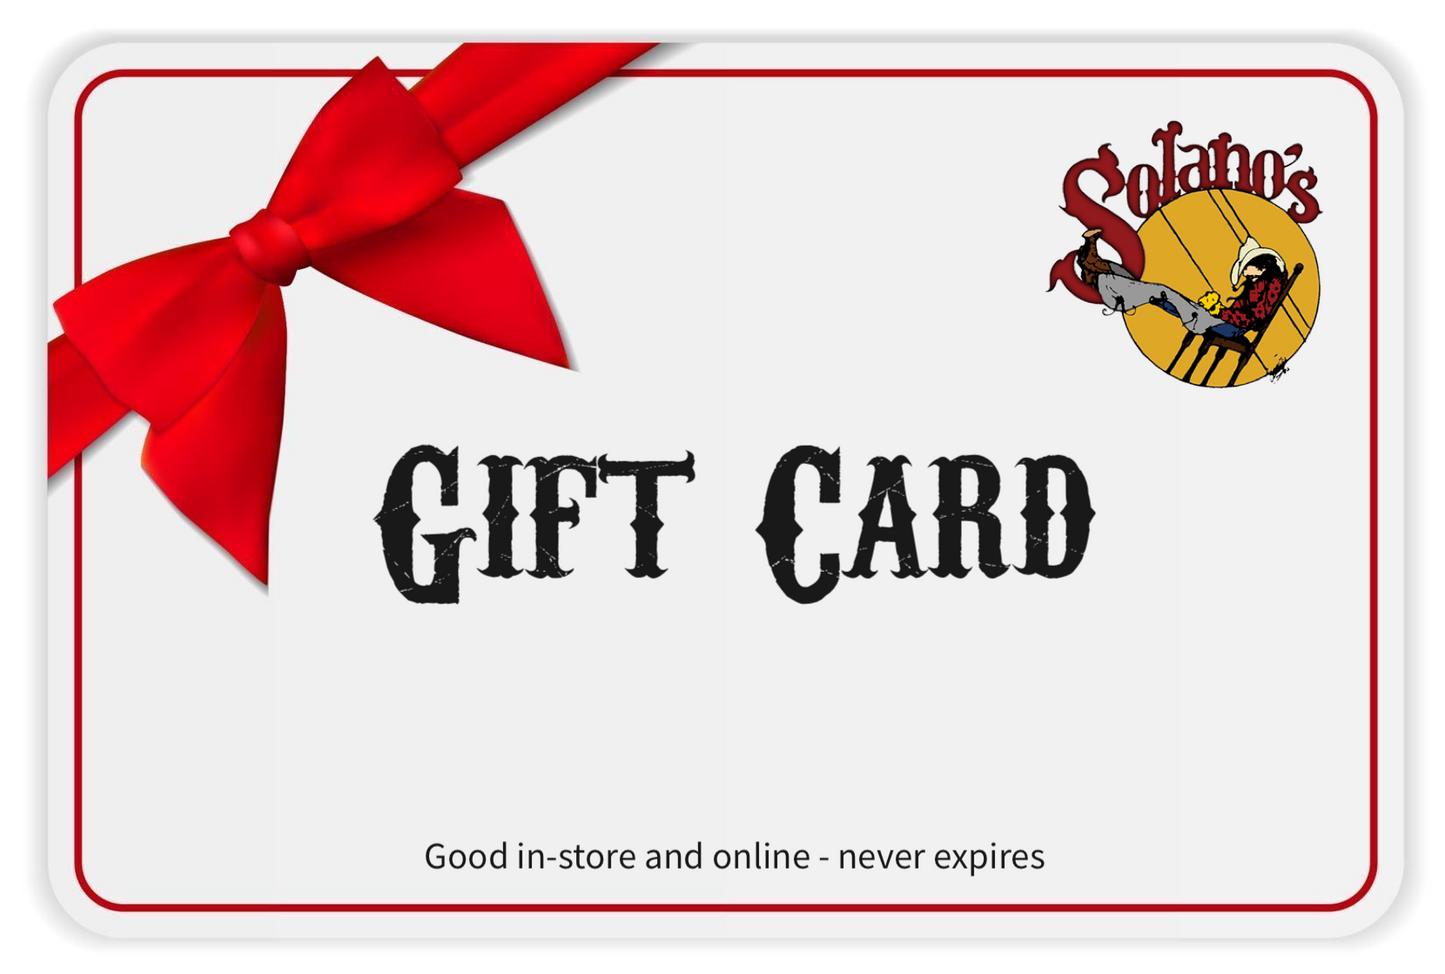 Solano's® Gift Card